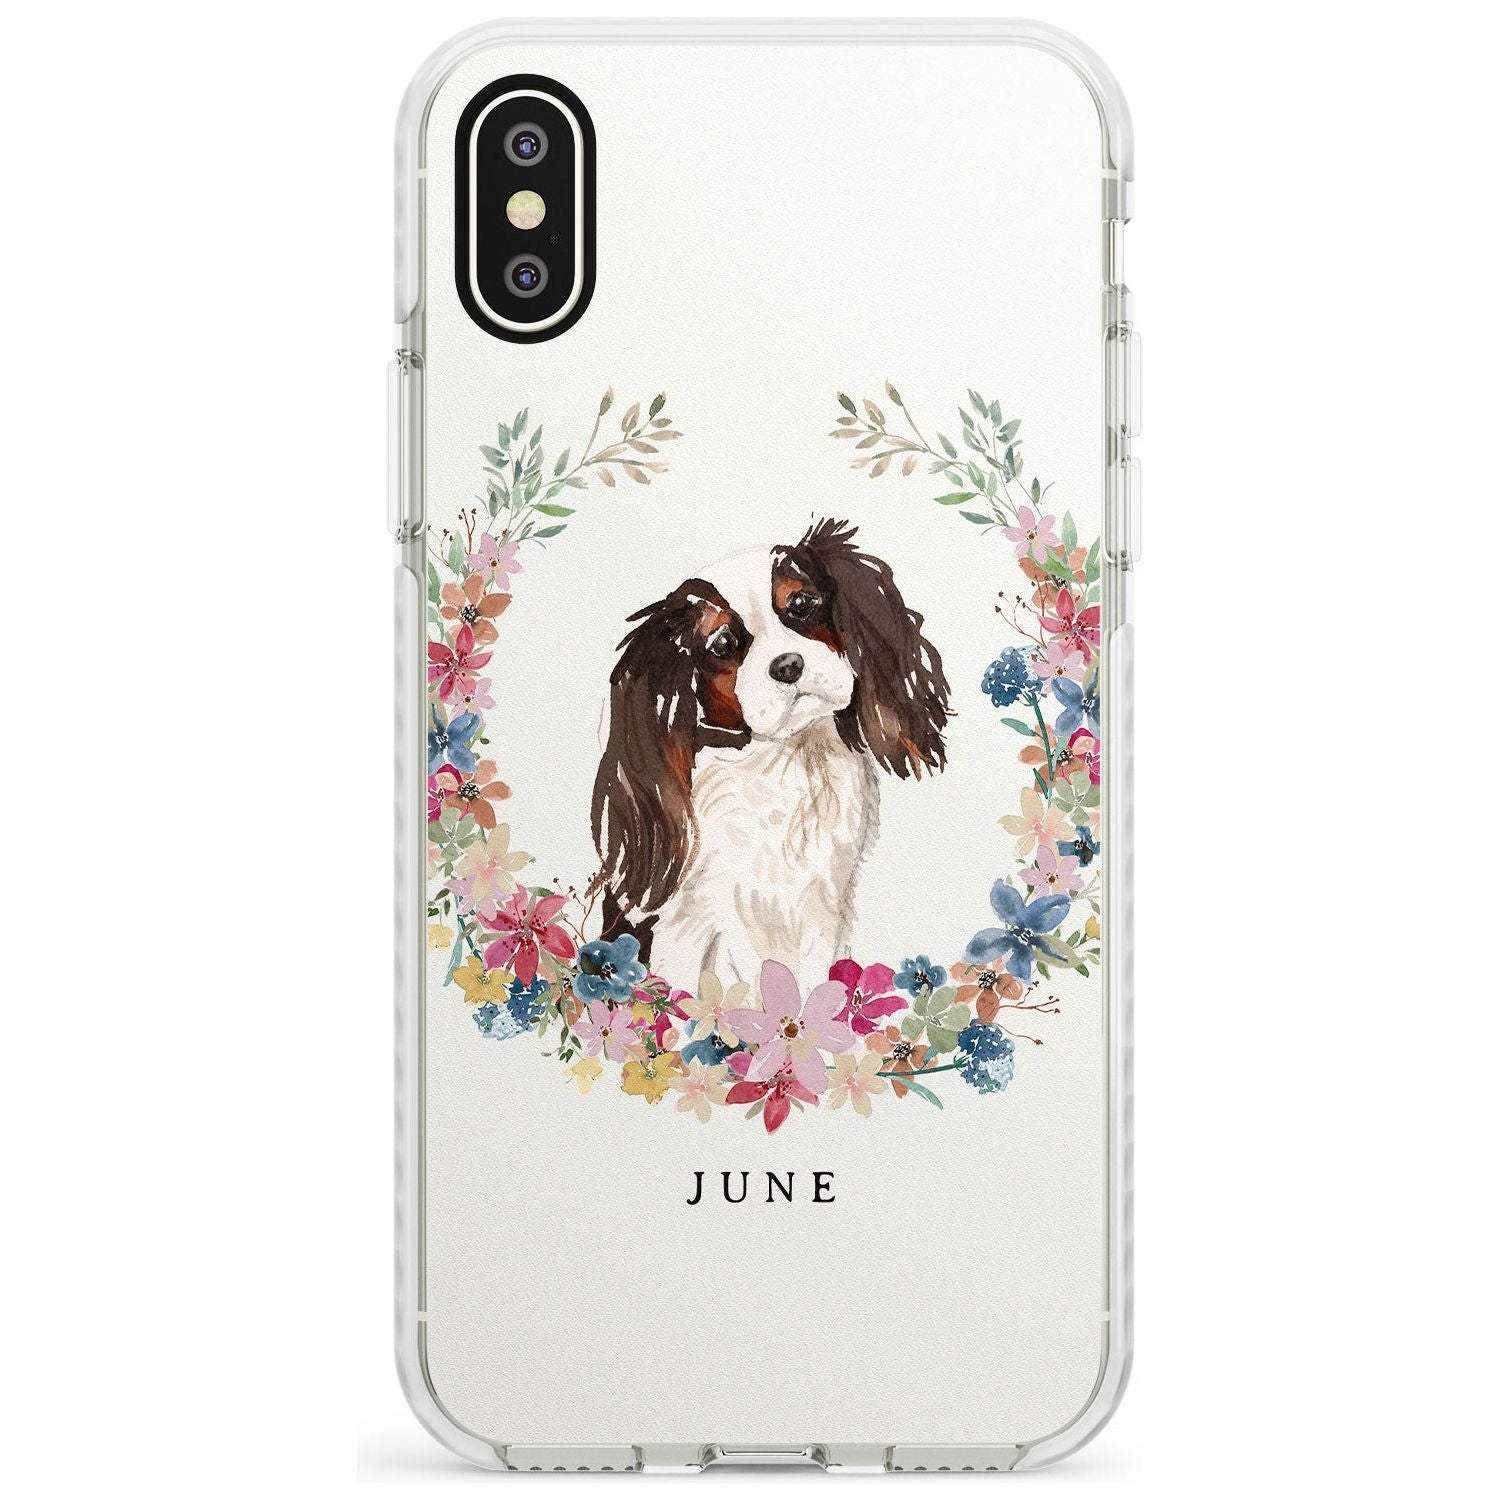 Tri Coloured King Charles Watercolour Dog Portrait Impact Phone Case for iPhone X XS Max XR